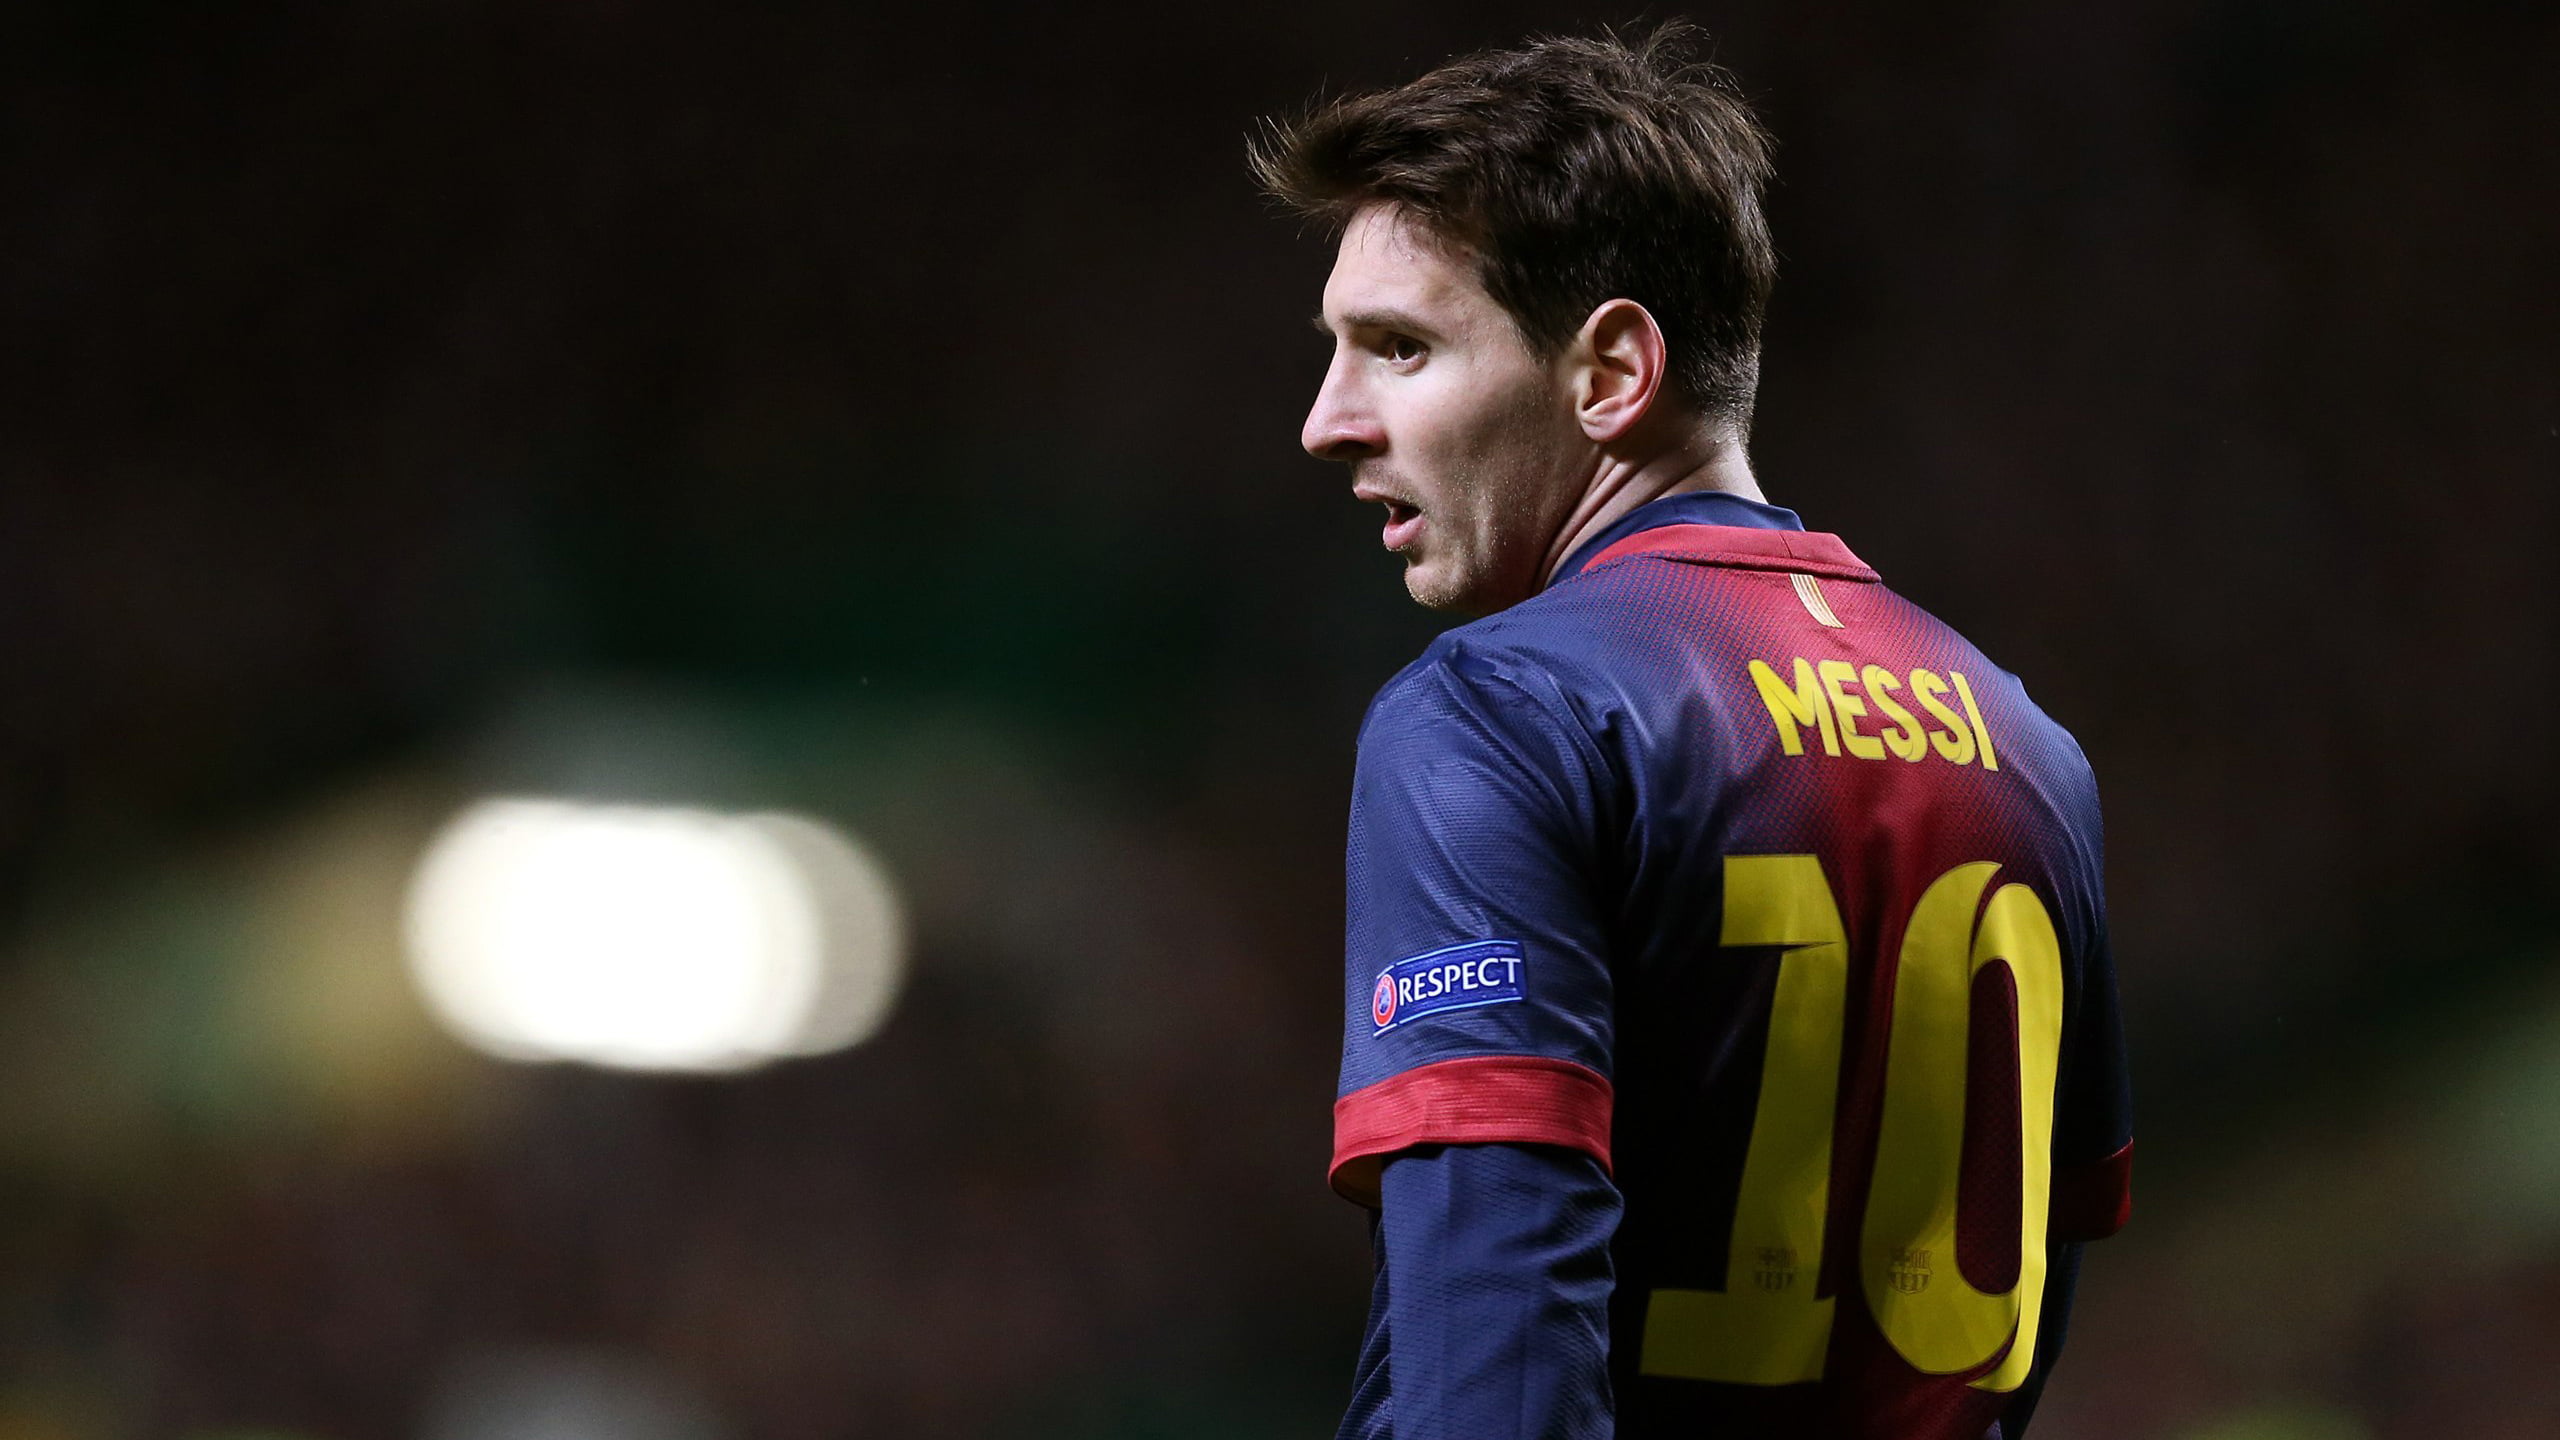 Selective focus photography of Messi soccer player HD wallpaper | Wallpaper  Flare